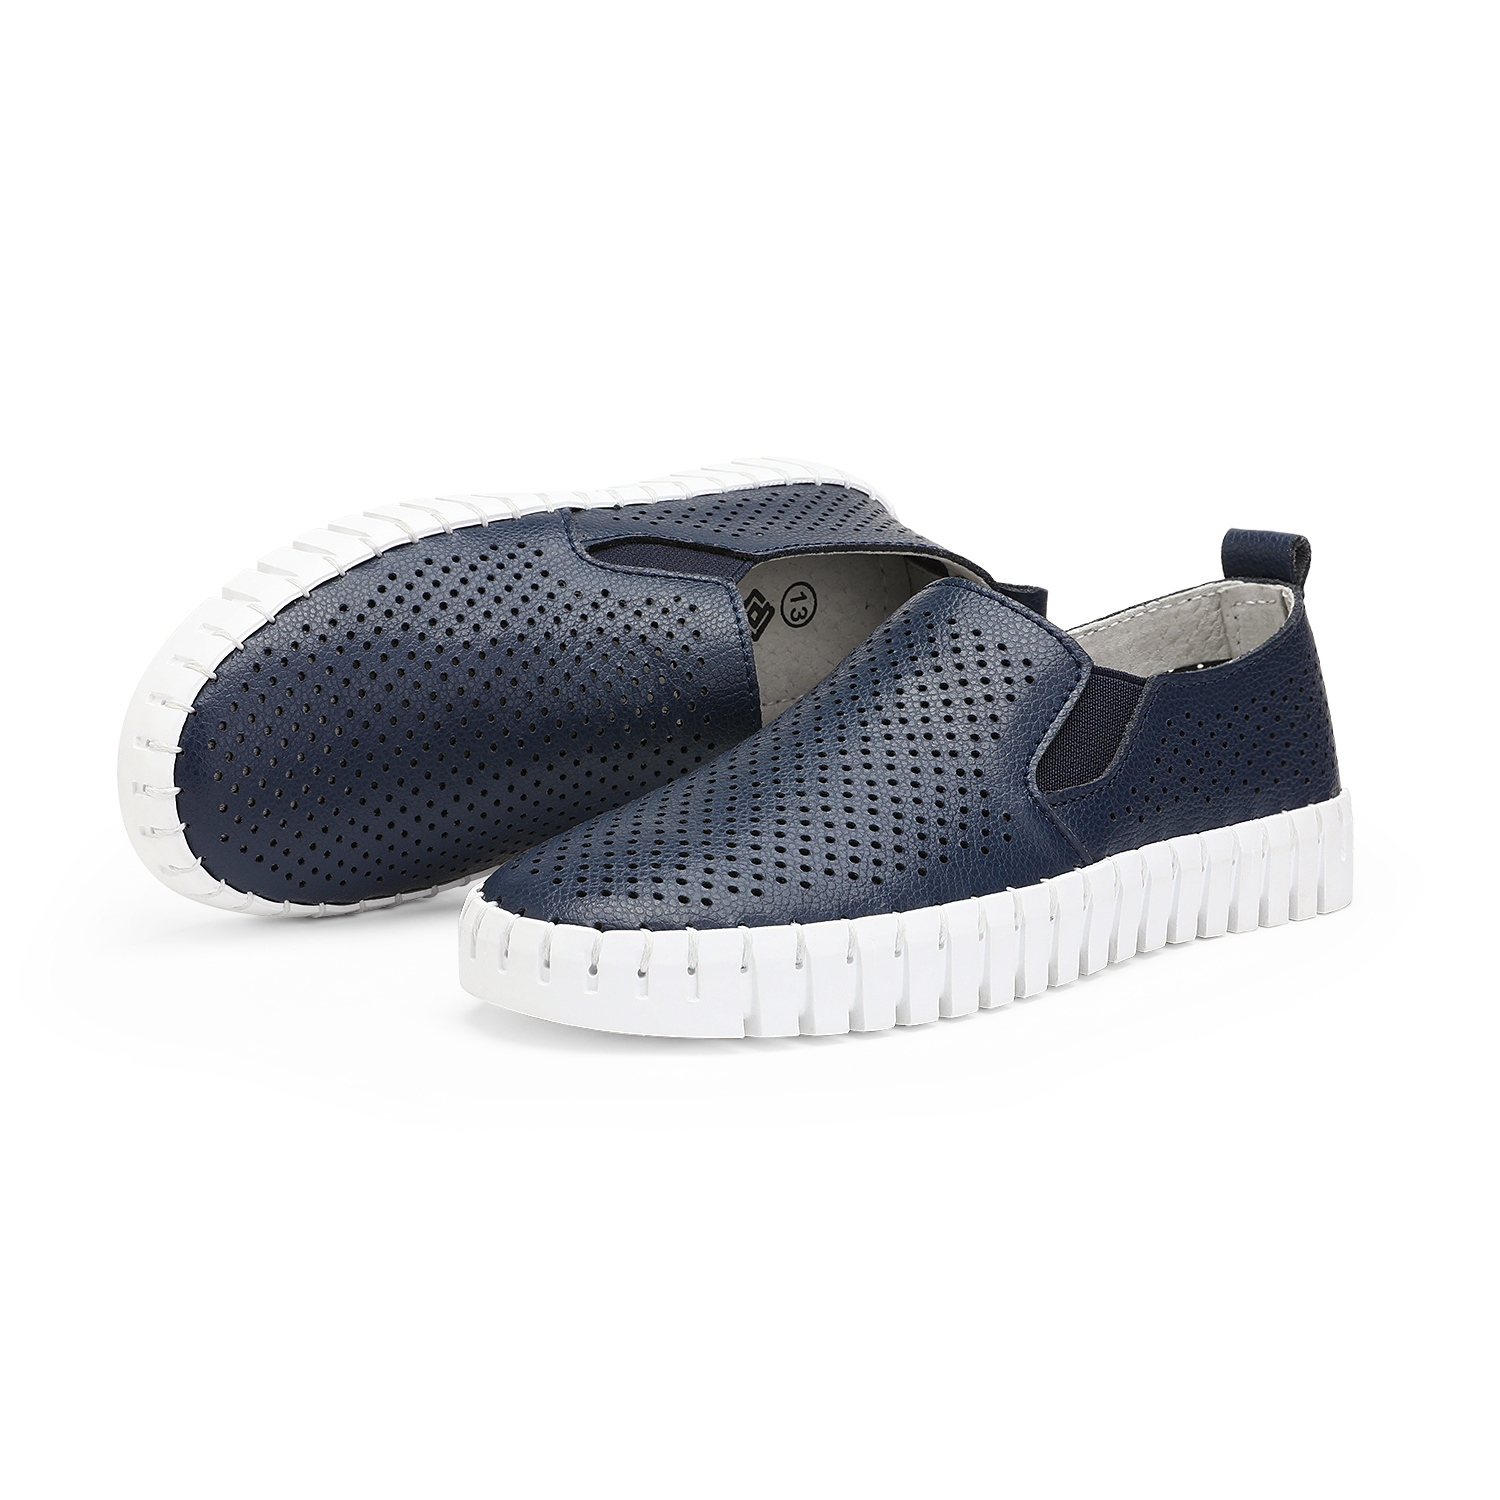 DREAM PAIRS Kids Boys & Girls Comfort Breath Slip-On Shoes Flats Loafers Outdoor Casual Shoes ESSA-K NAVY Size 10 - image 3 of 4